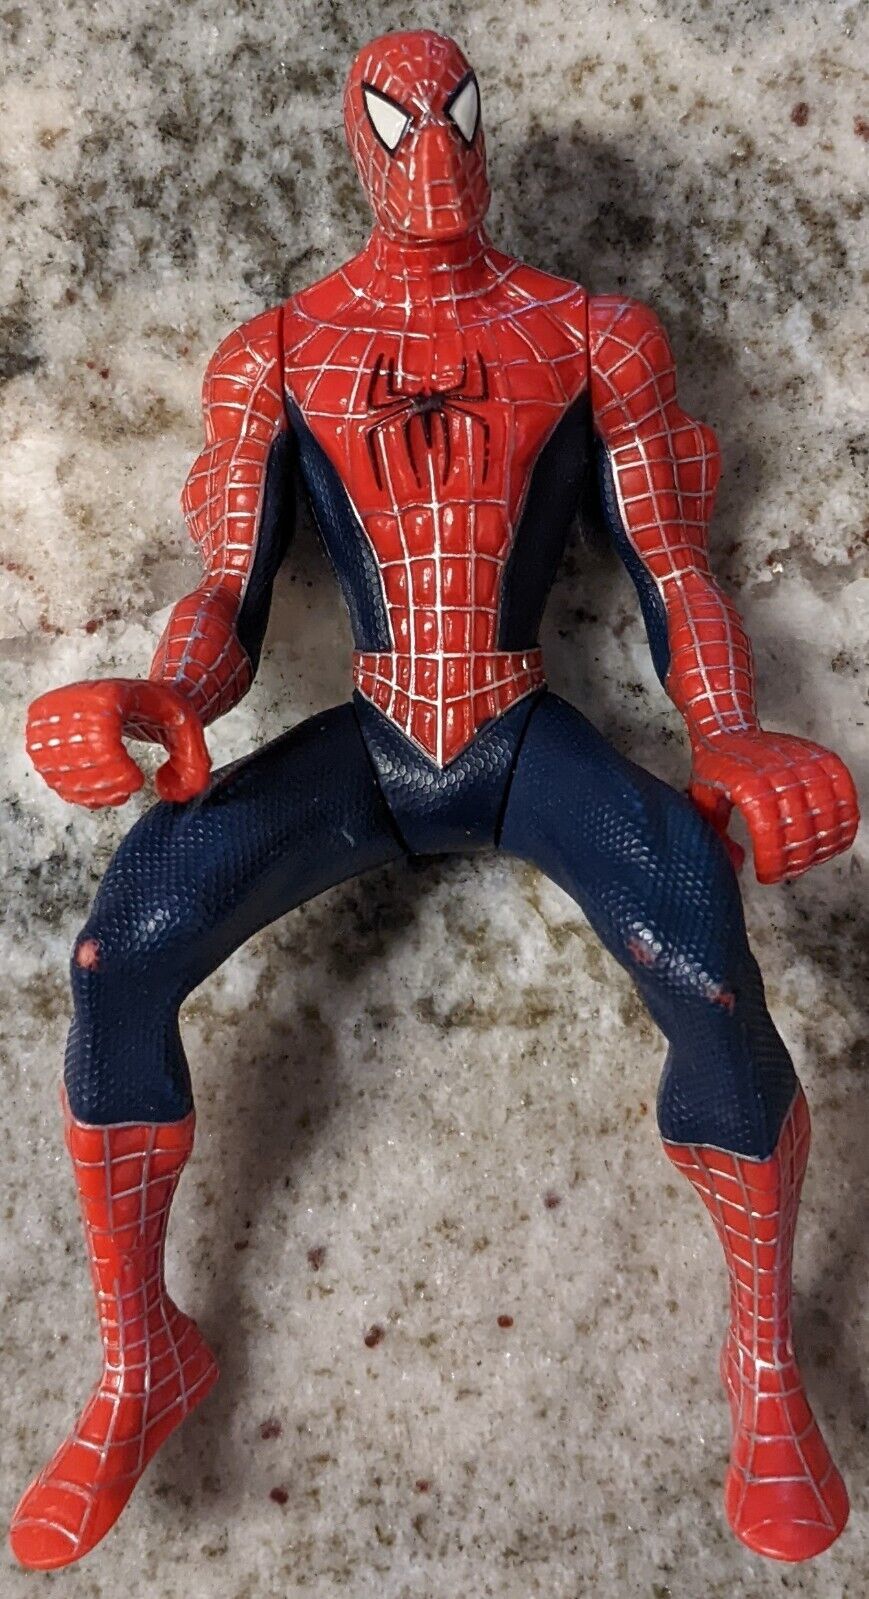 Spiderman The Movie Riding/Sitting Position Action Figure ~ 2002 ~ Hasbro - $5.50